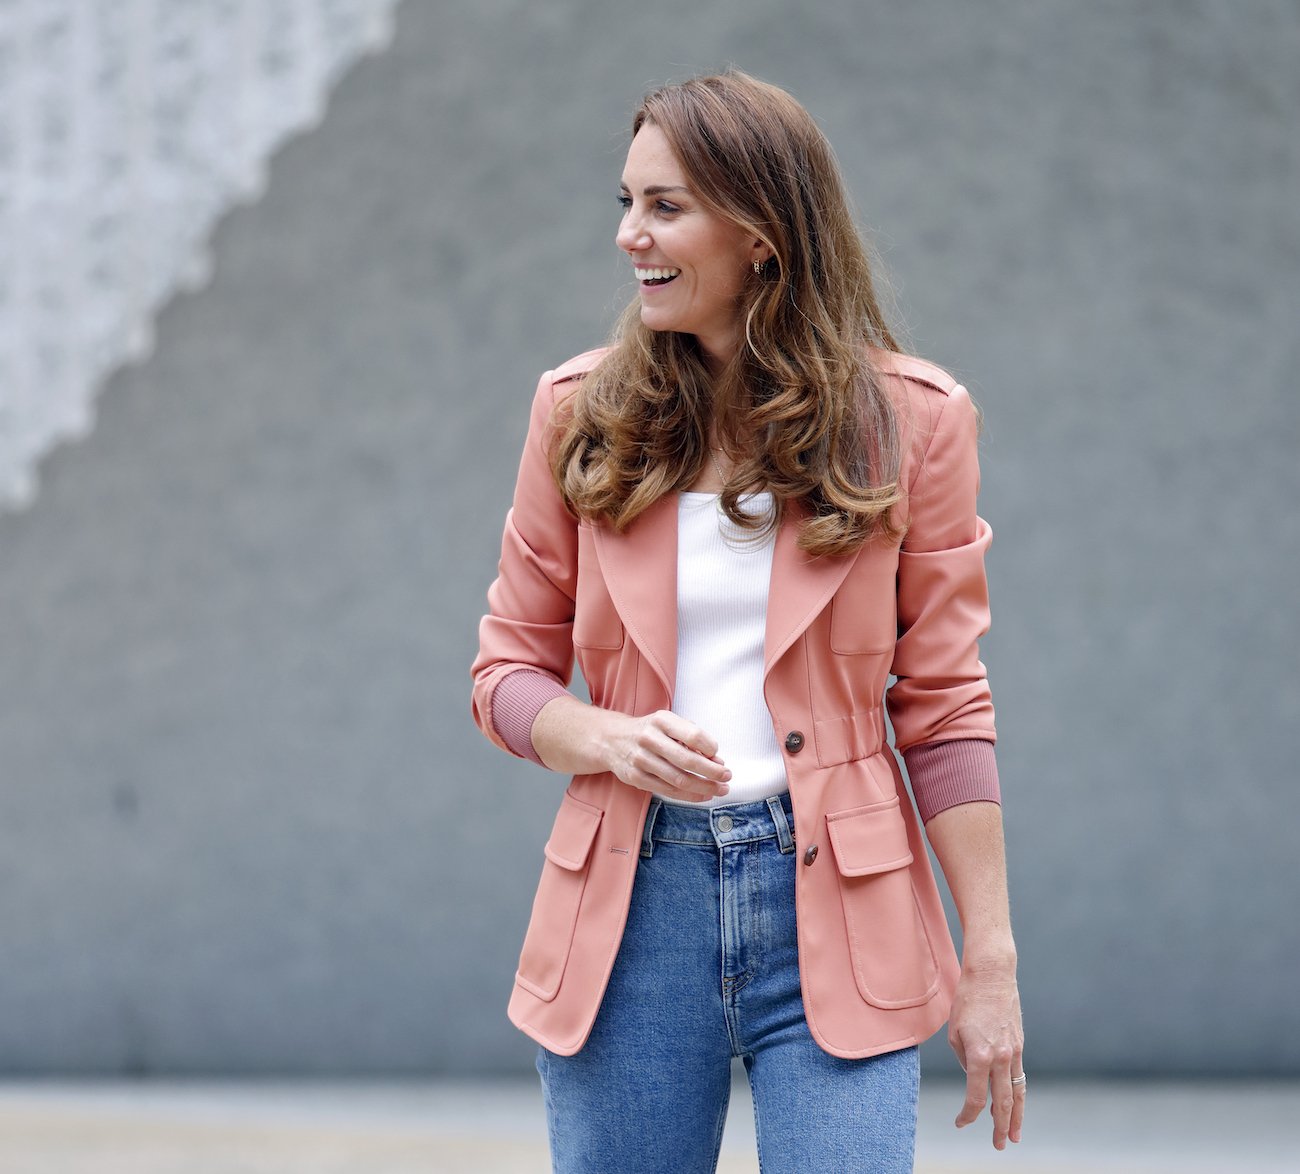 Kate Middleton wearing a salmon-colored blazer and blue jeans